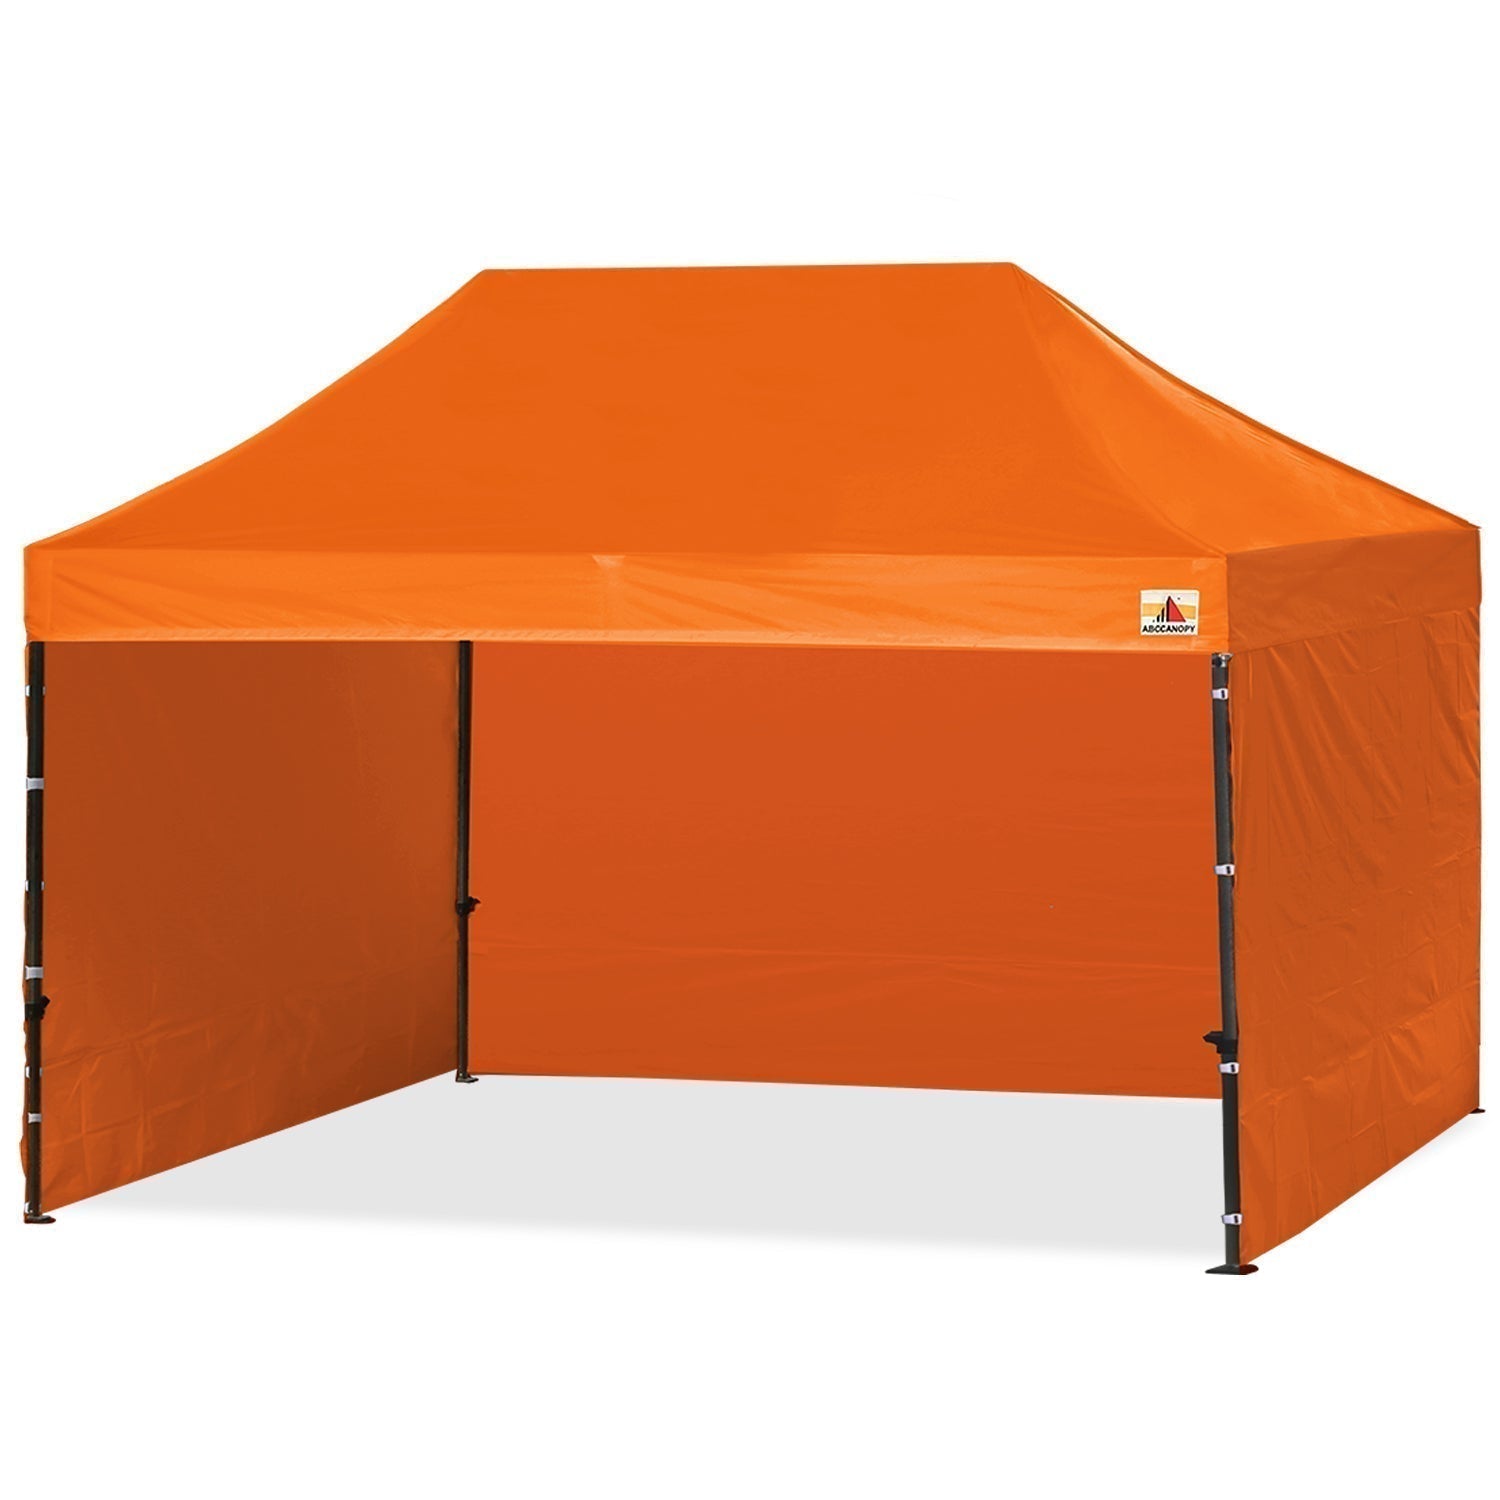 S1 Commercial Pop Up Canopy Tent 10x15 Instant Shelter